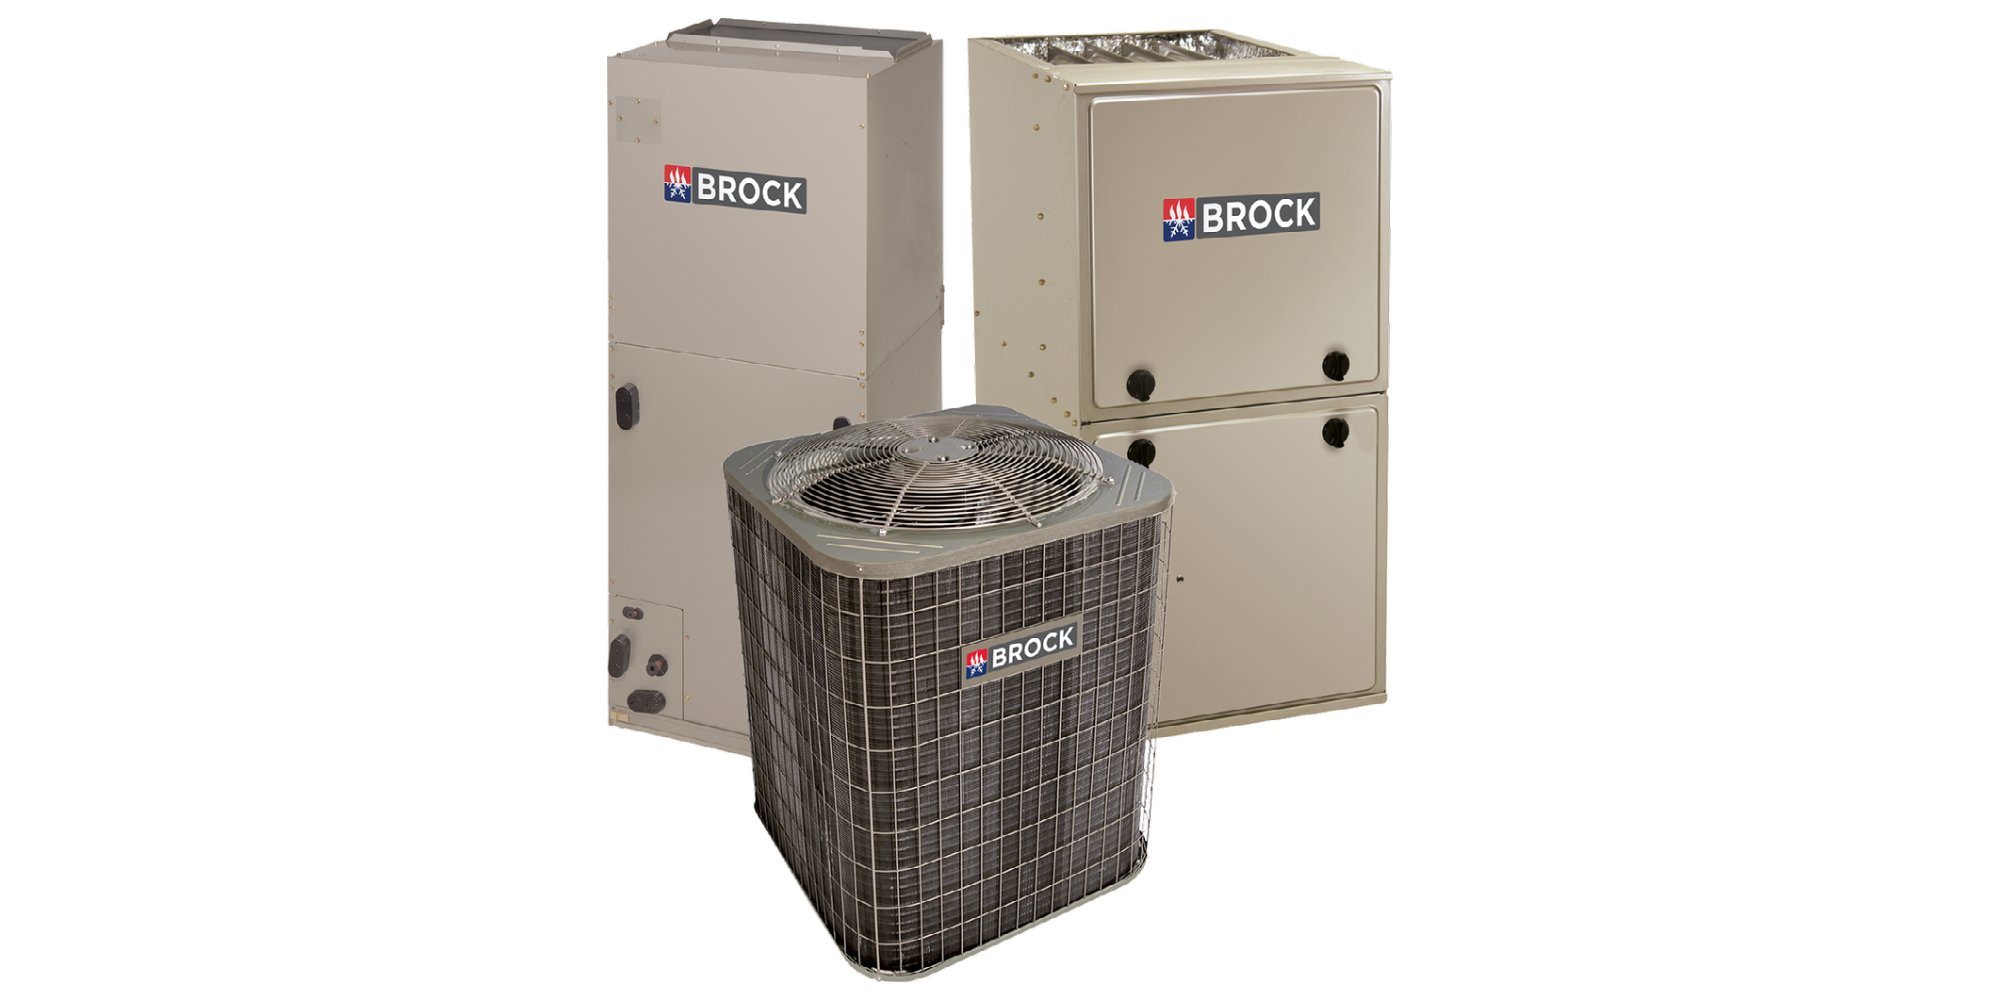 Brock air conditioning units